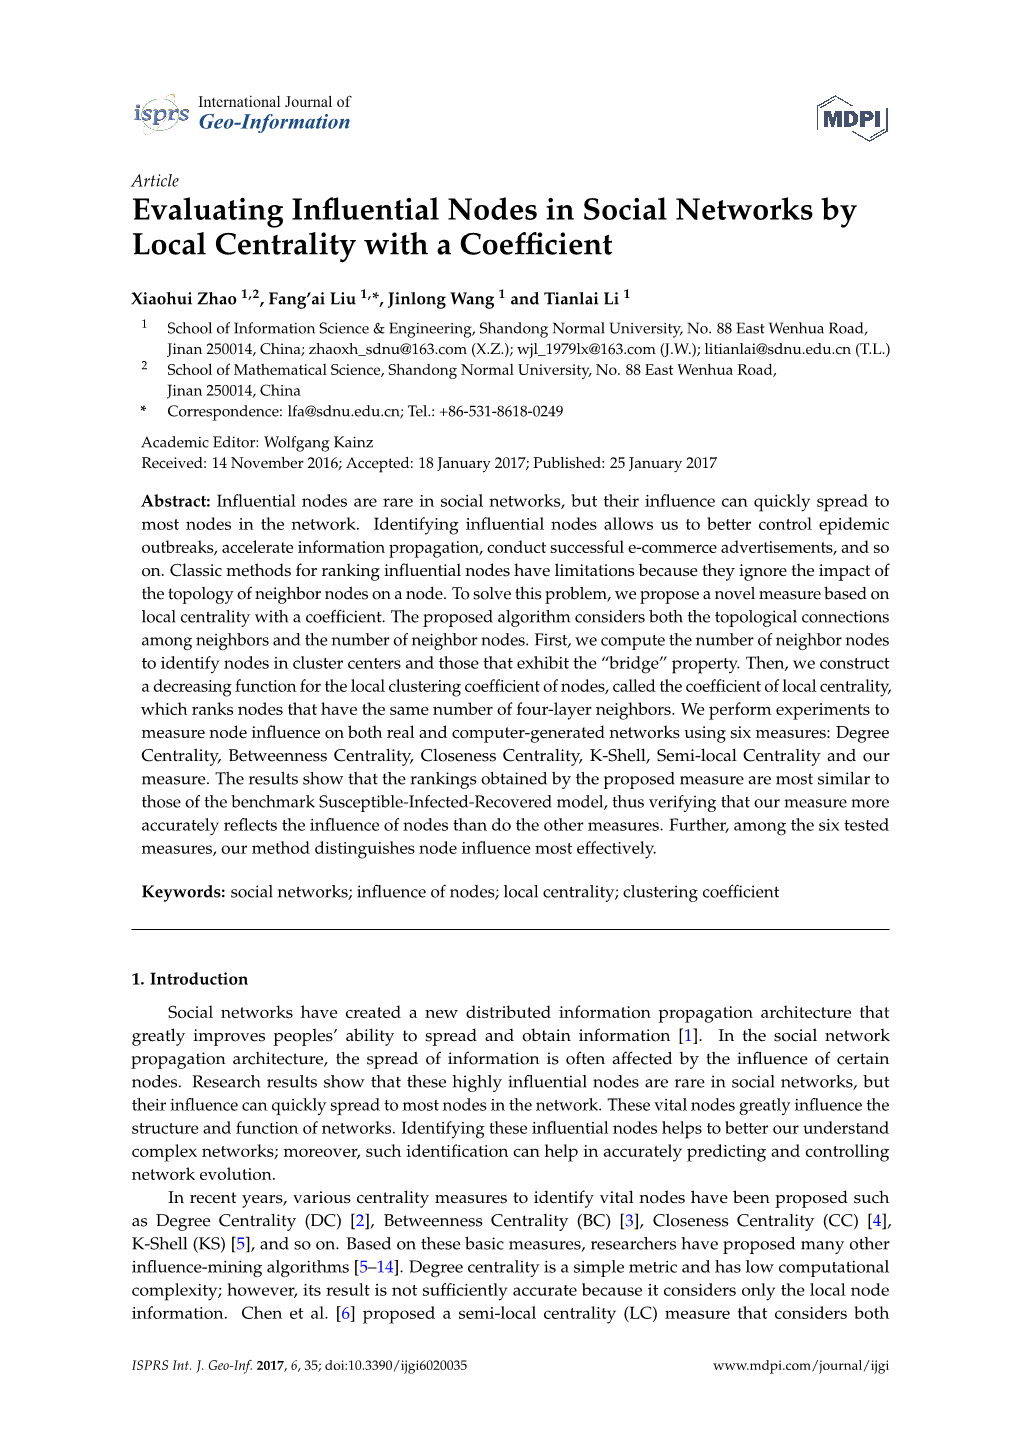 Evaluating Influential Nodes in Social Networks by Local Centrality